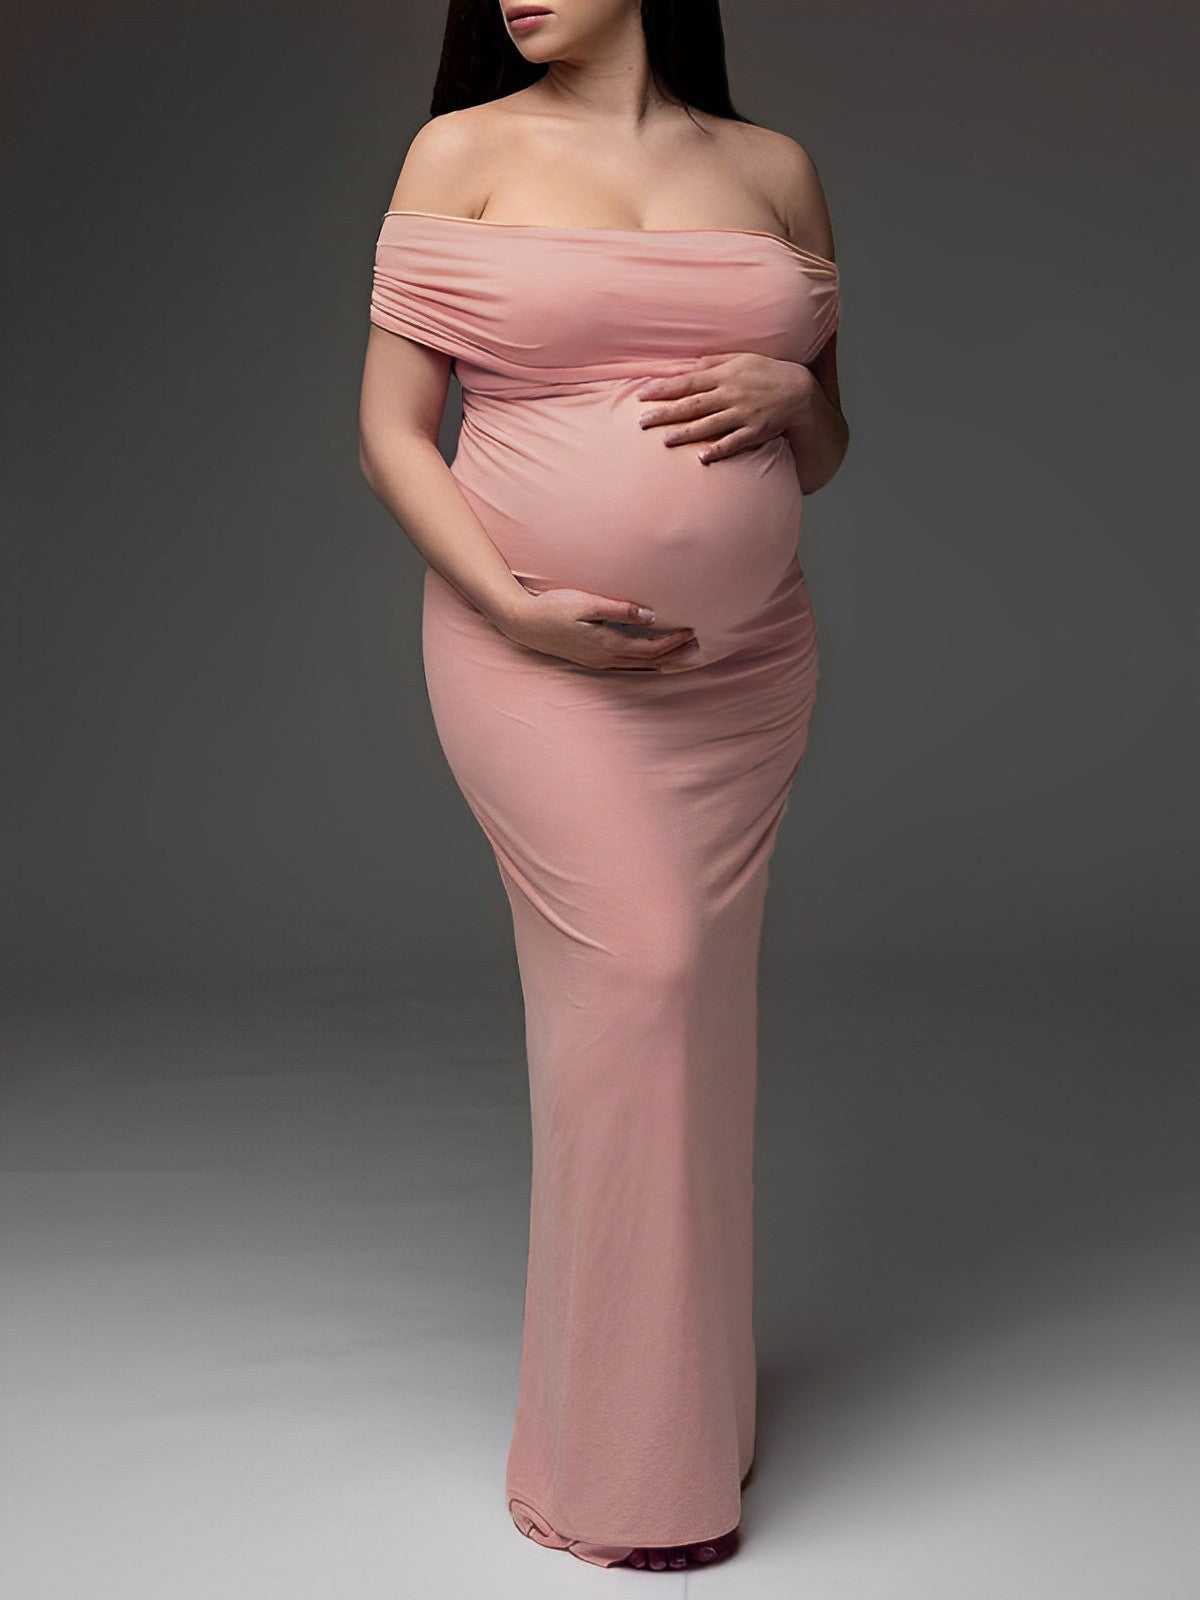 Momnfancy Pink Off Shoulder Ruched Boat Neck Bodycon Photoshoot Maternity Maxi Dress